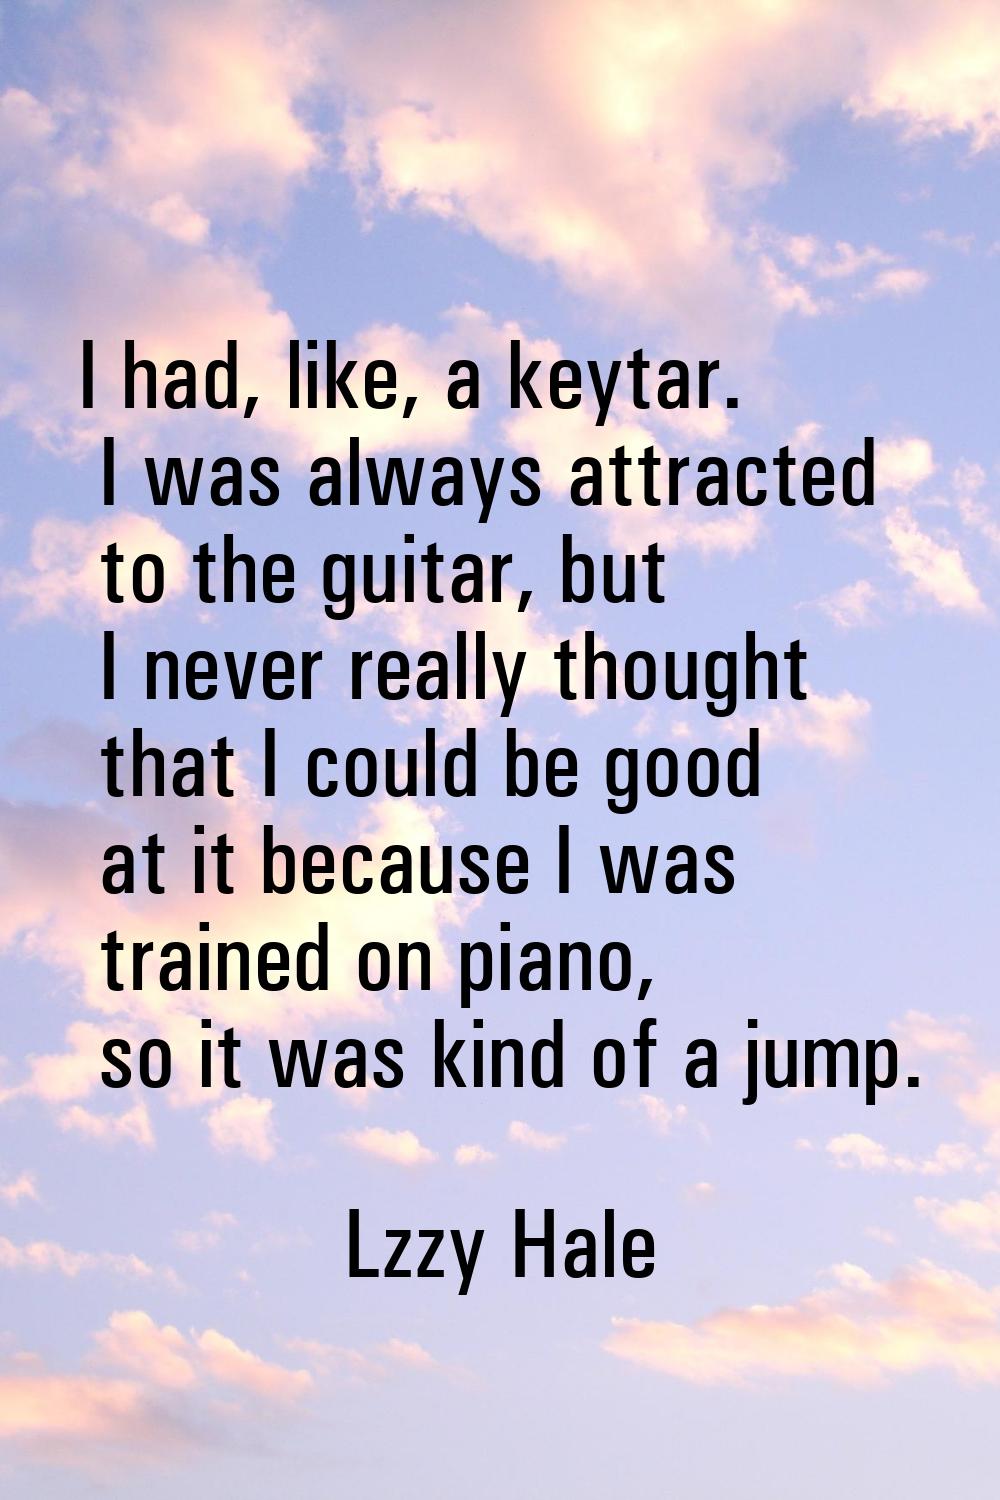 I had, like, a keytar. I was always attracted to the guitar, but I never really thought that I coul